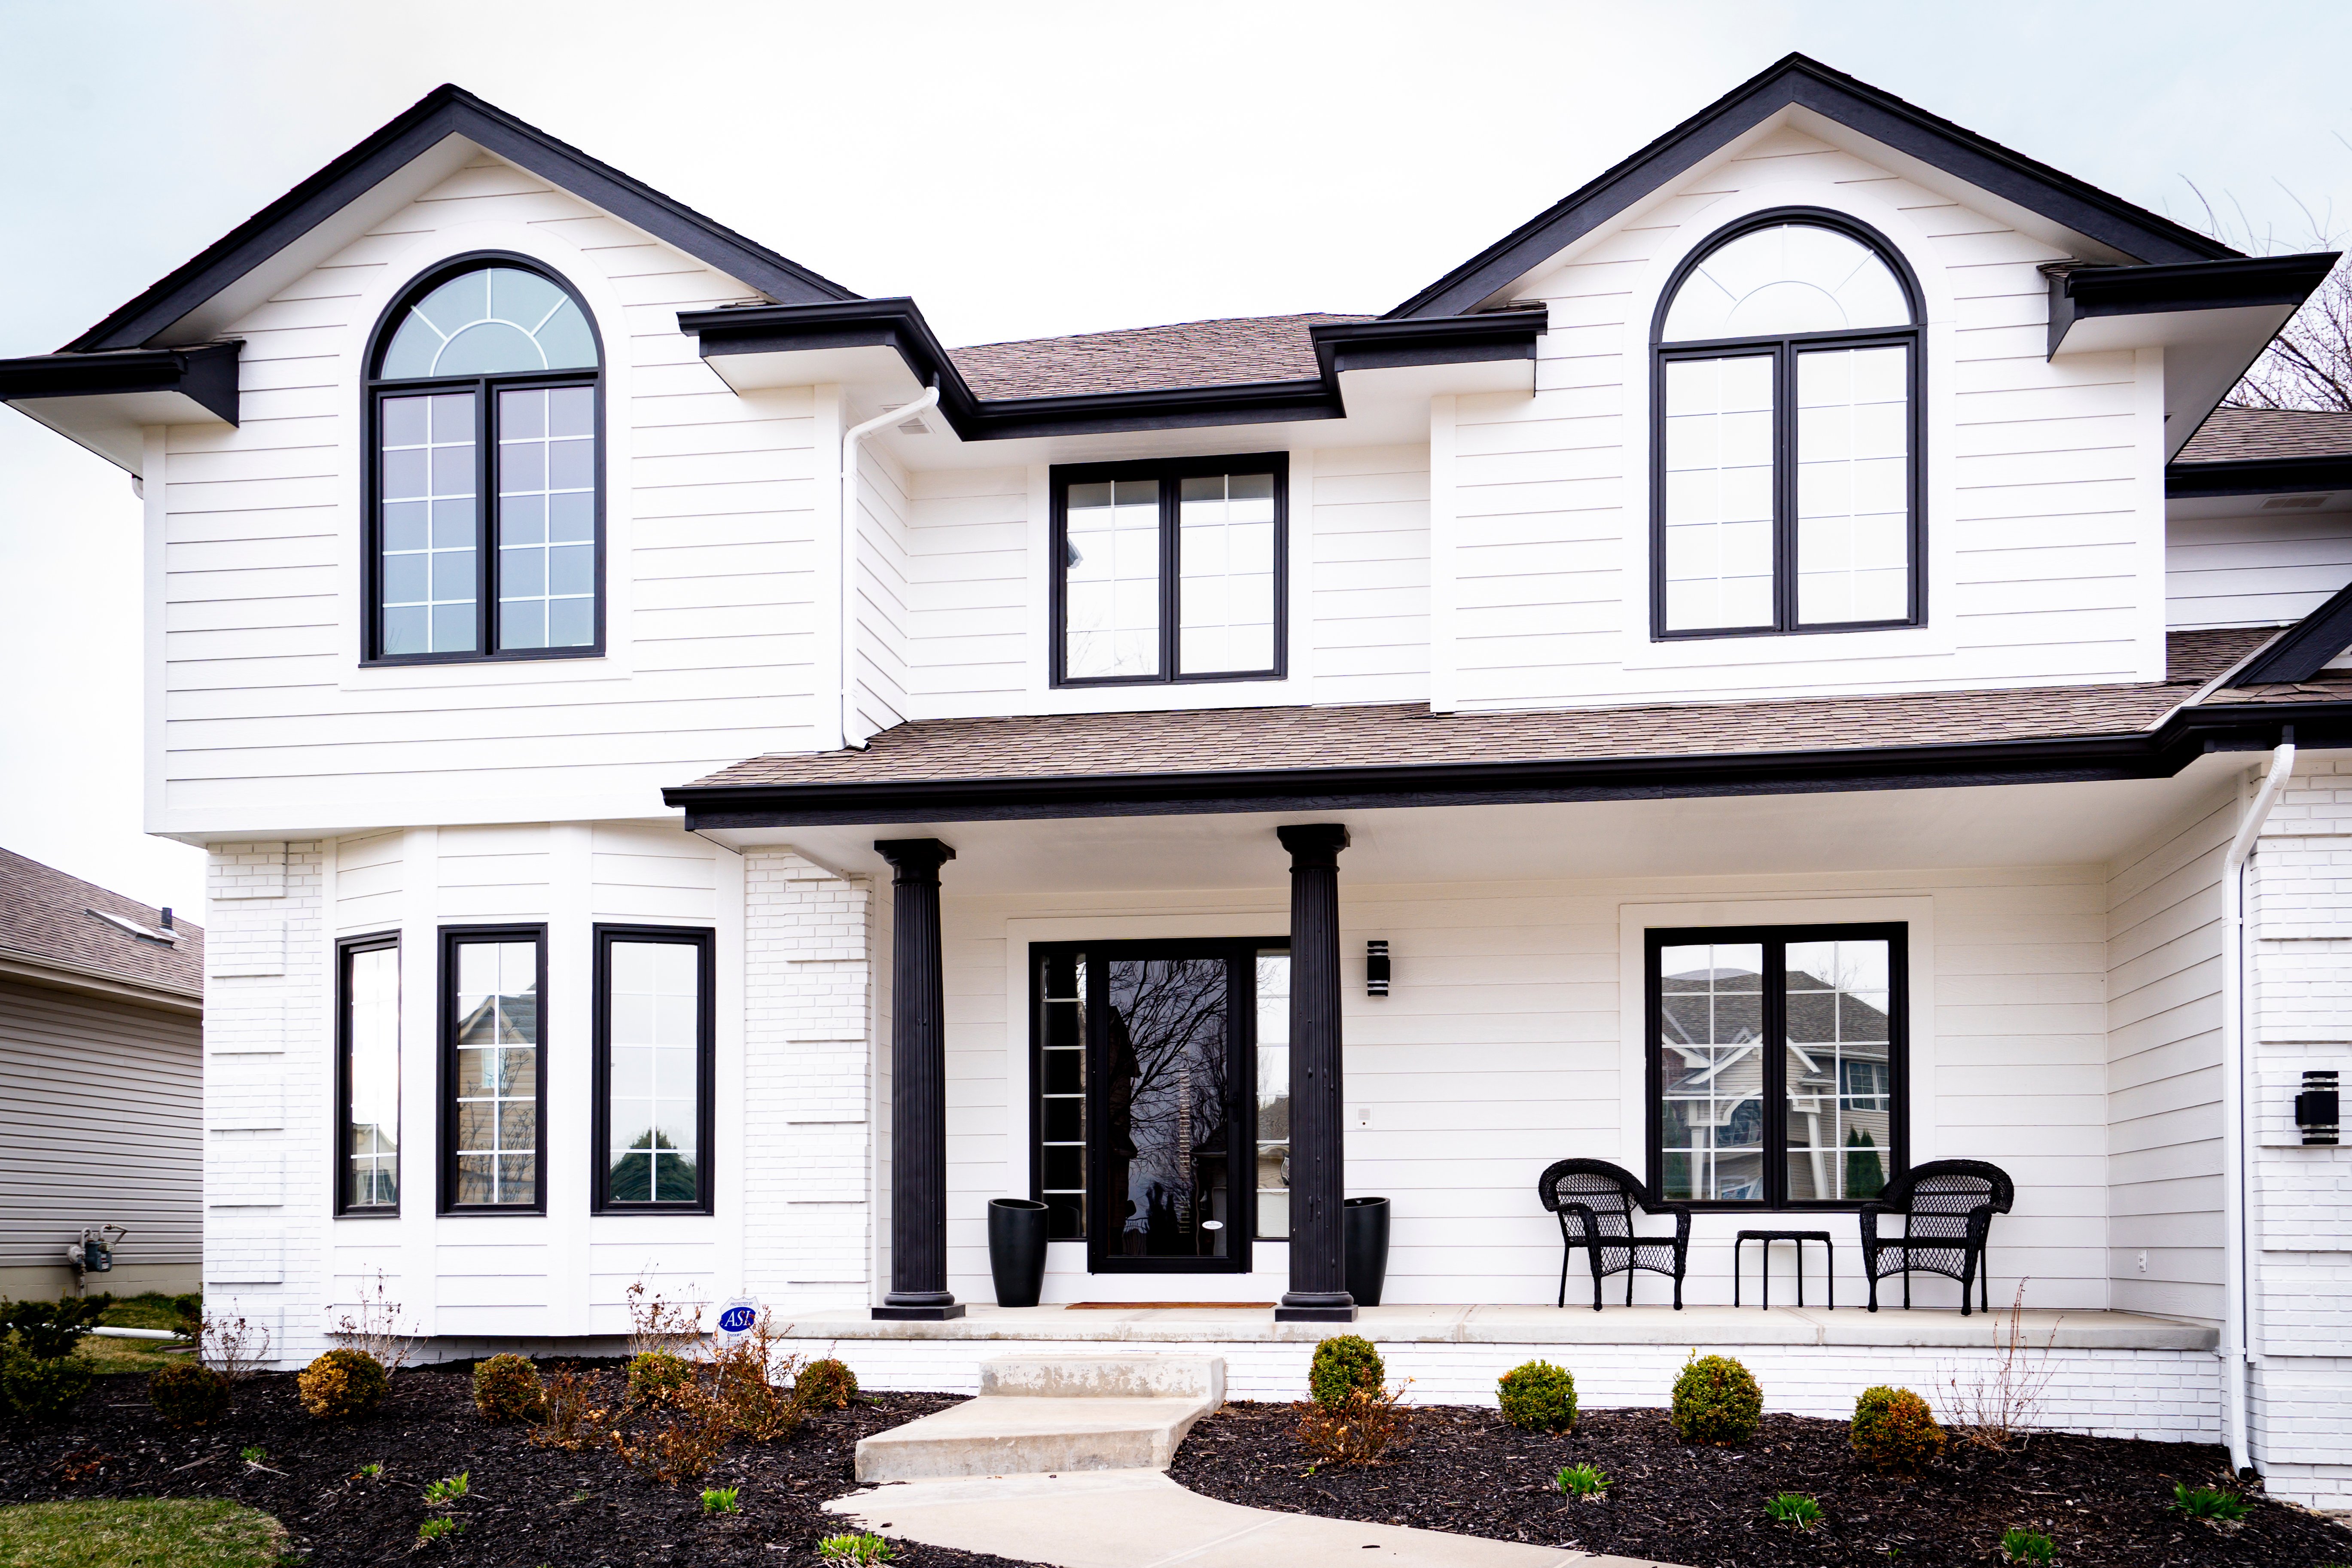 White painted exterior home with black trim.